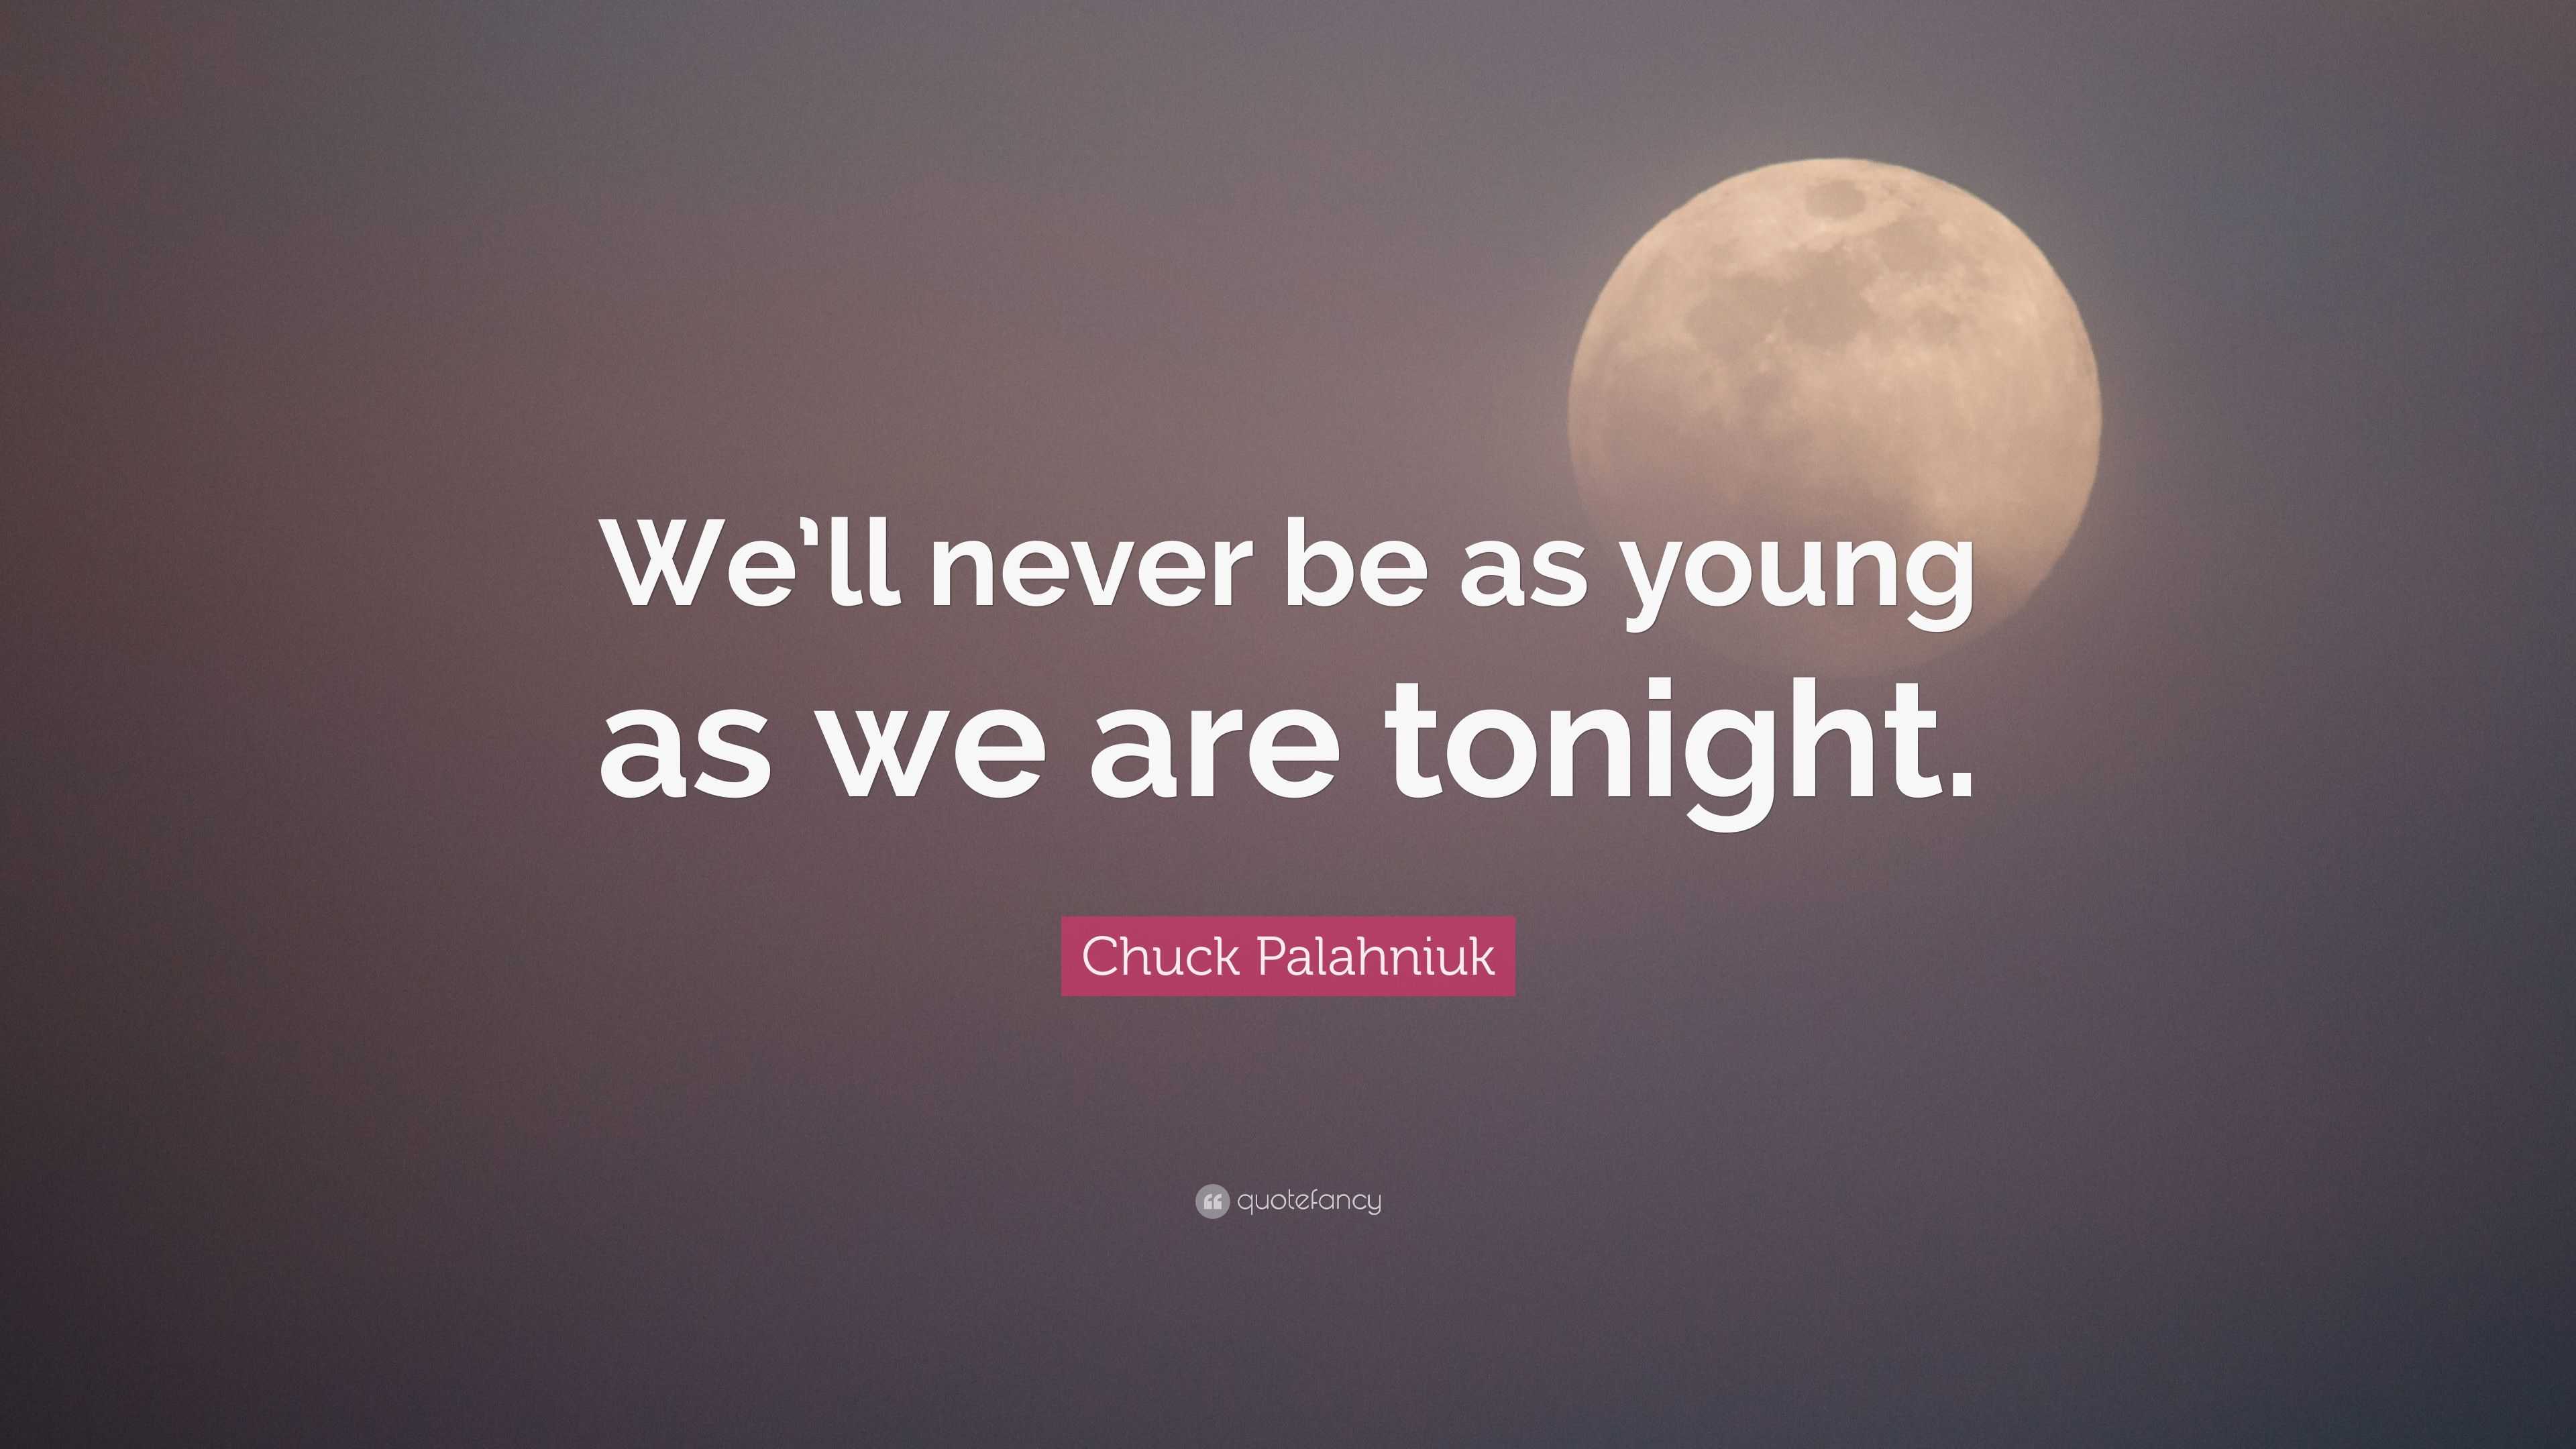 Chuck Palahniuk Quote: “We’ll never be as young as we are tonight.”